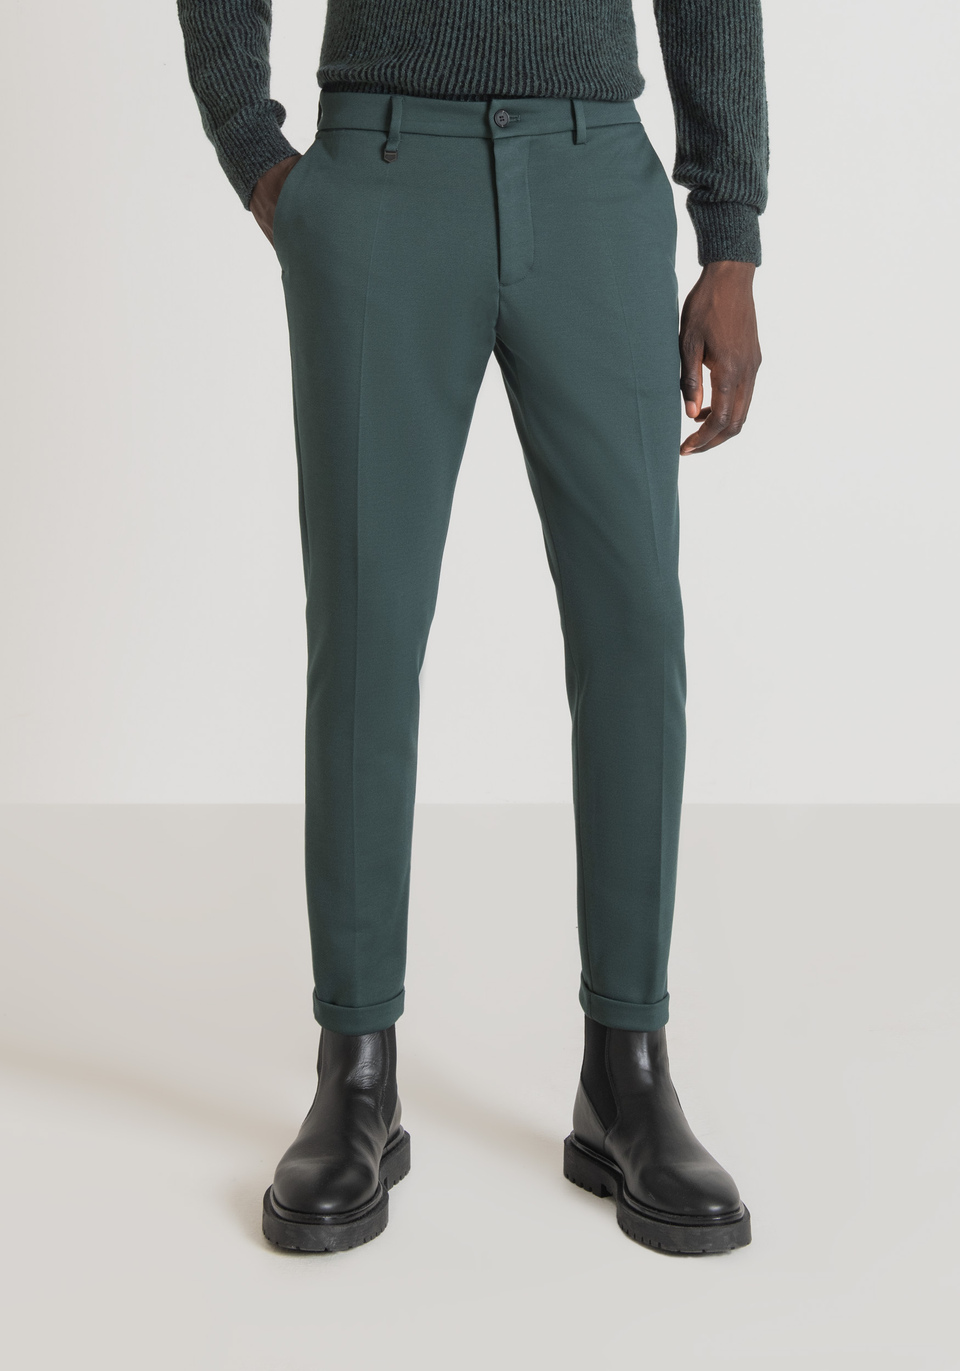 "ASHE" SUPER SKINNY FIT TROUSERS IN STRETCH BLEND VISCOSE TWILL - Antony Morato Online Shop